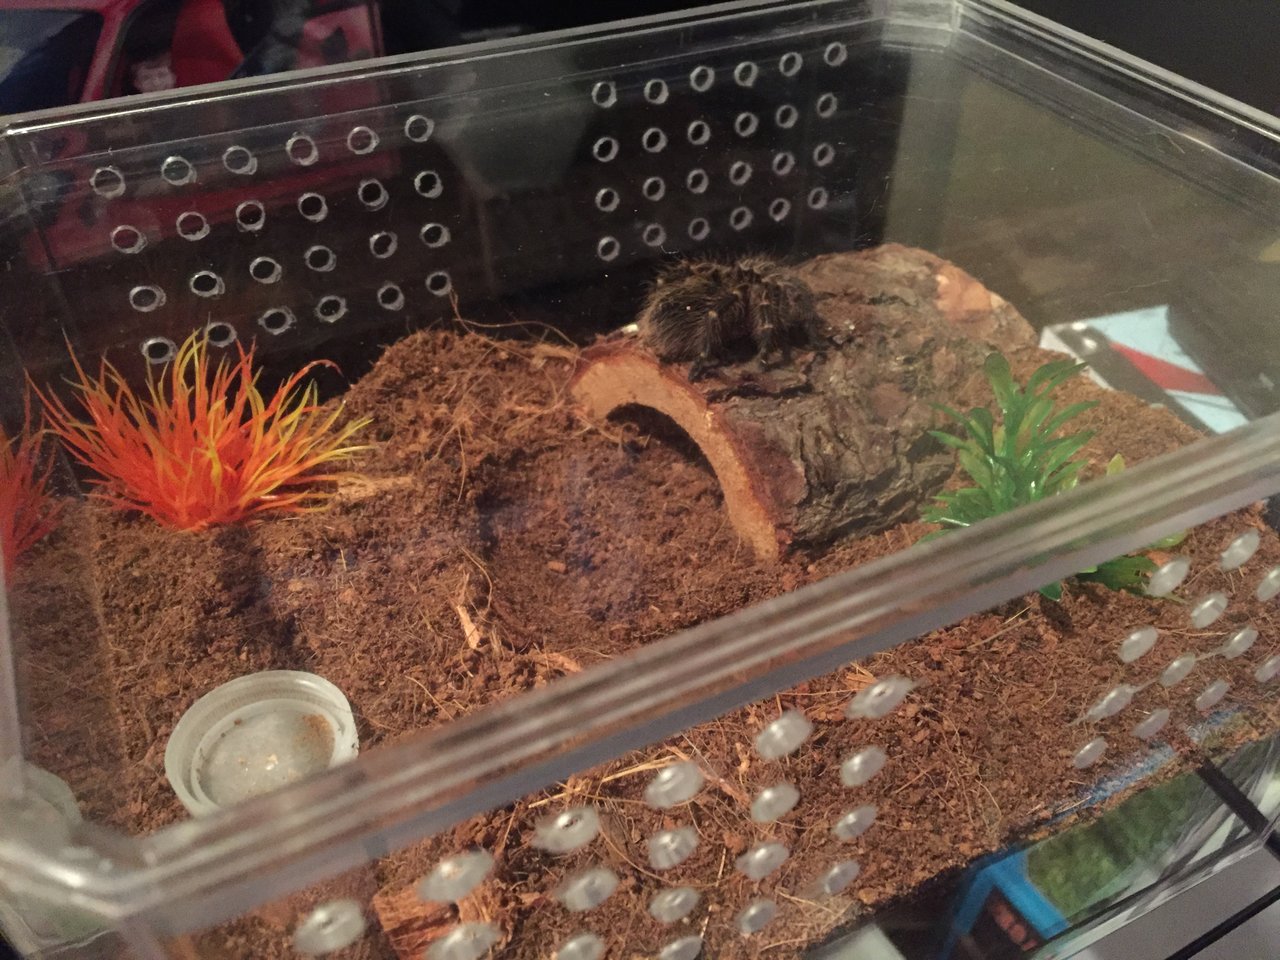 G.pulchripes new home